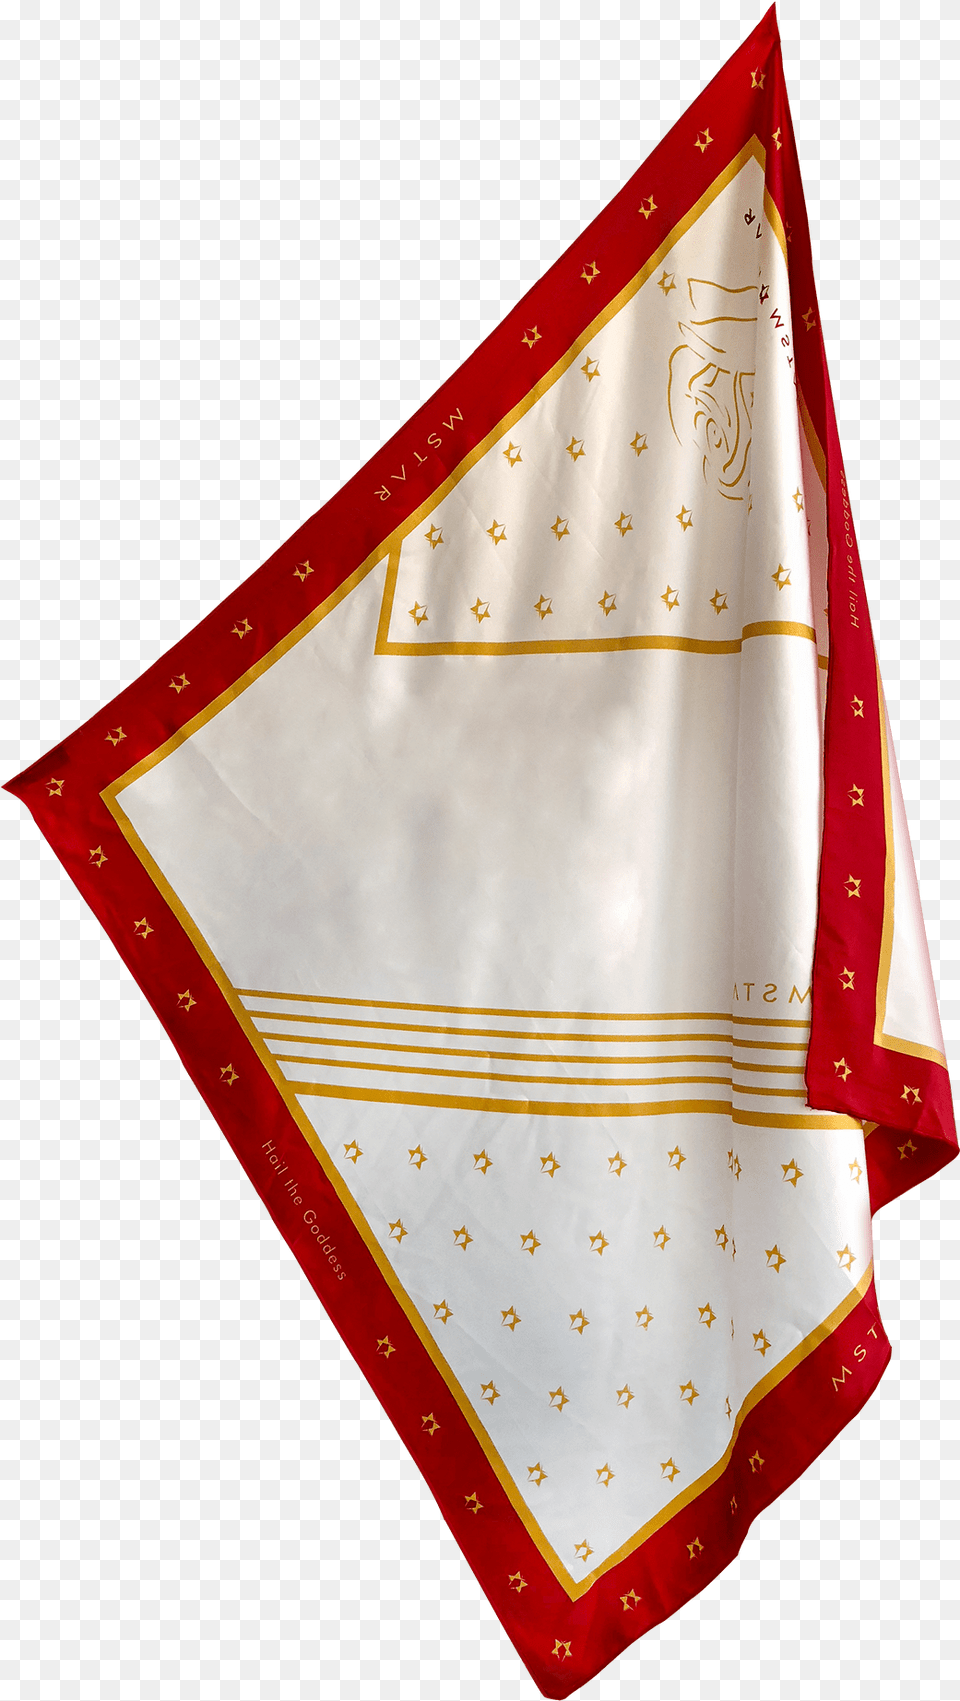 Download Hd Hail The Goddess Red And Gold Woman Silk Scarf Flag, Accessories, Bandana, Headband Free Transparent Png